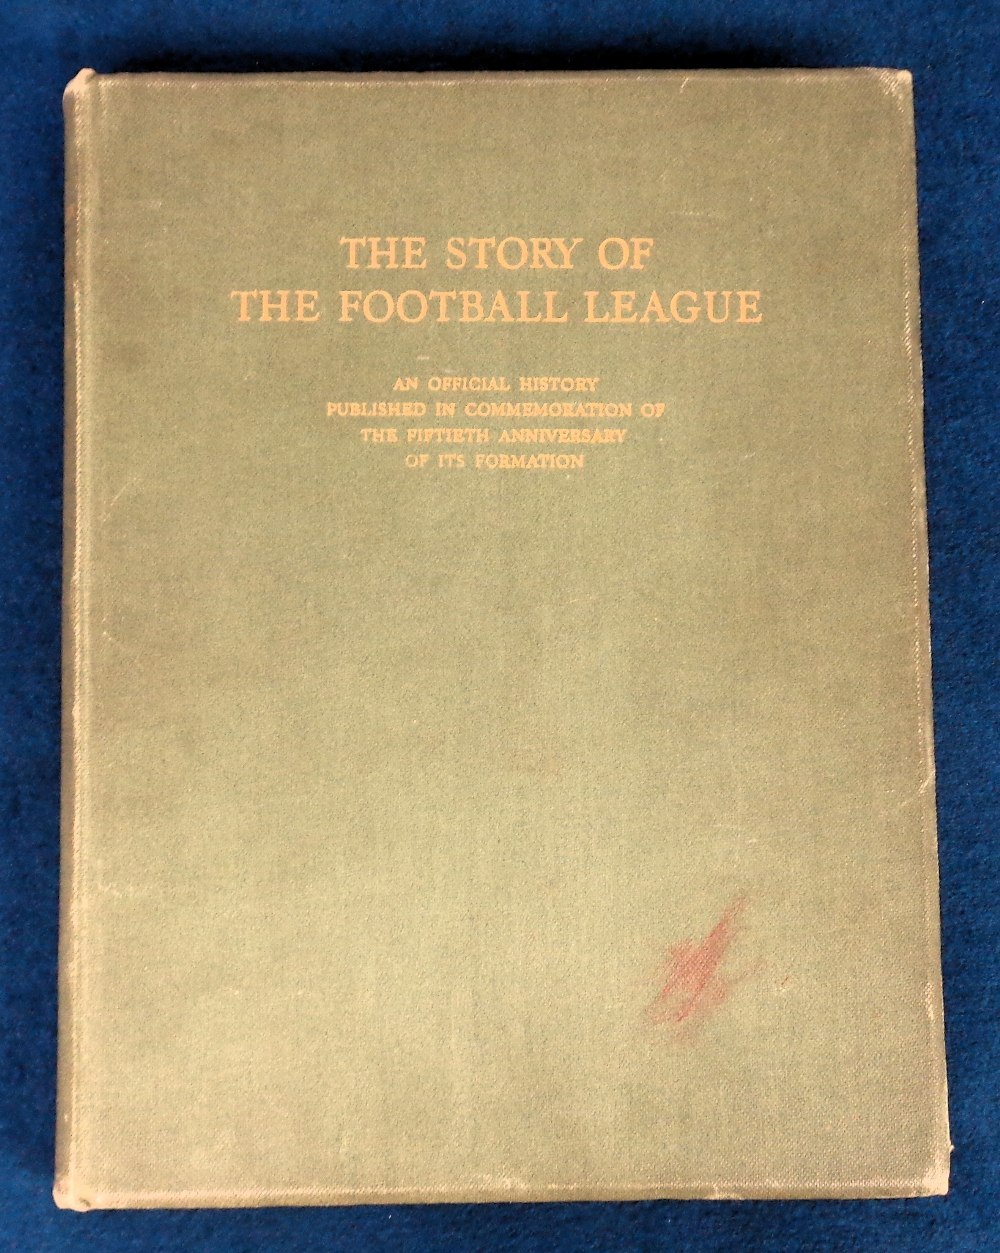 Football book, 'The Story of the Football League, 1888-1938' an official history compiled by